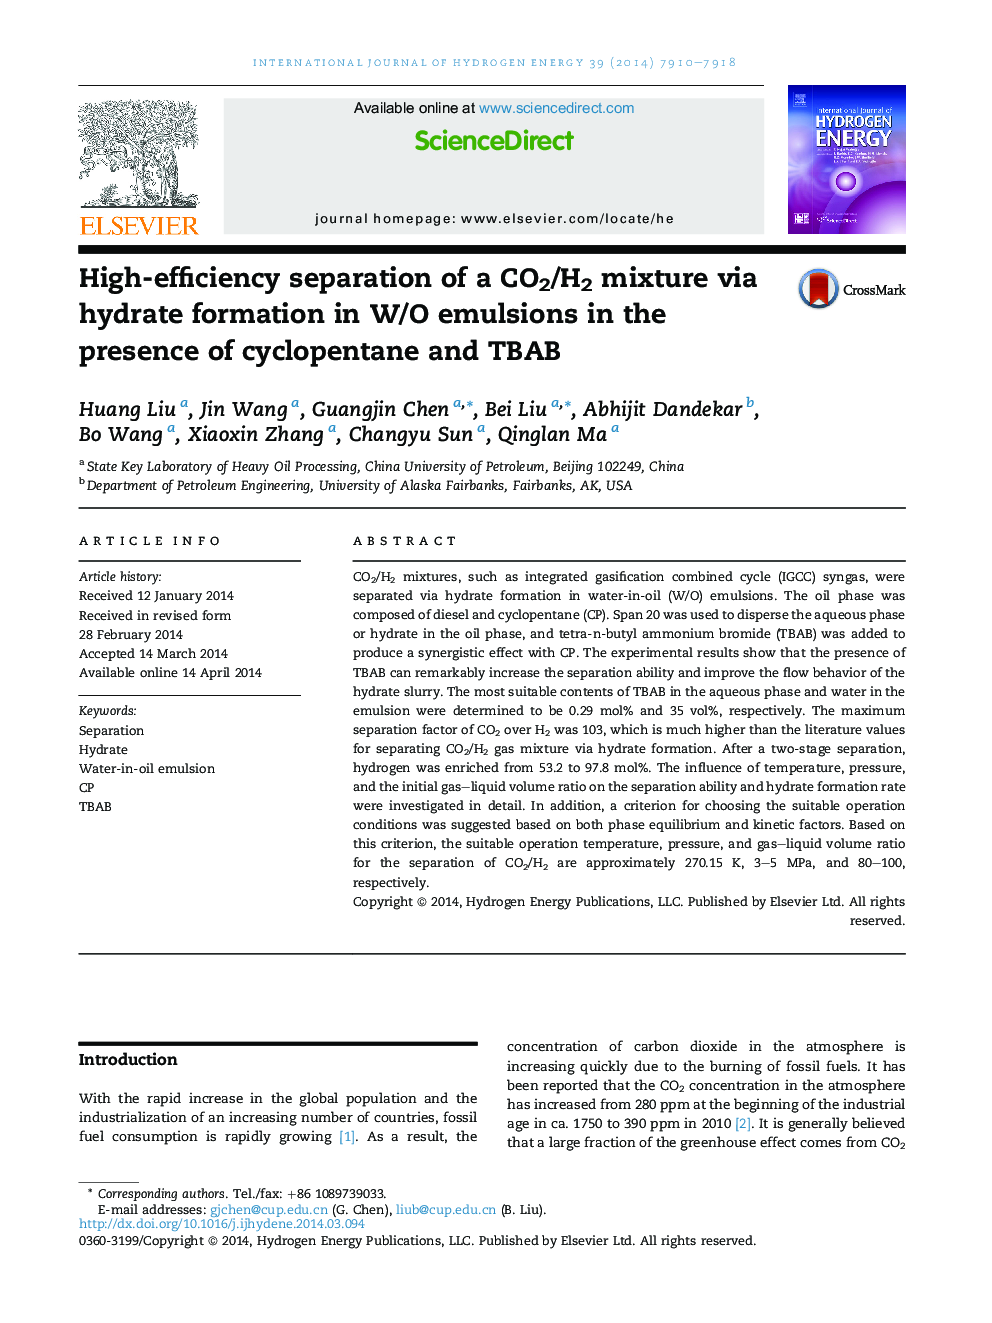 High-efficiency separation of a CO2/H2 mixture via hydrate formation in W/O emulsions in the presence of cyclopentane and TBAB